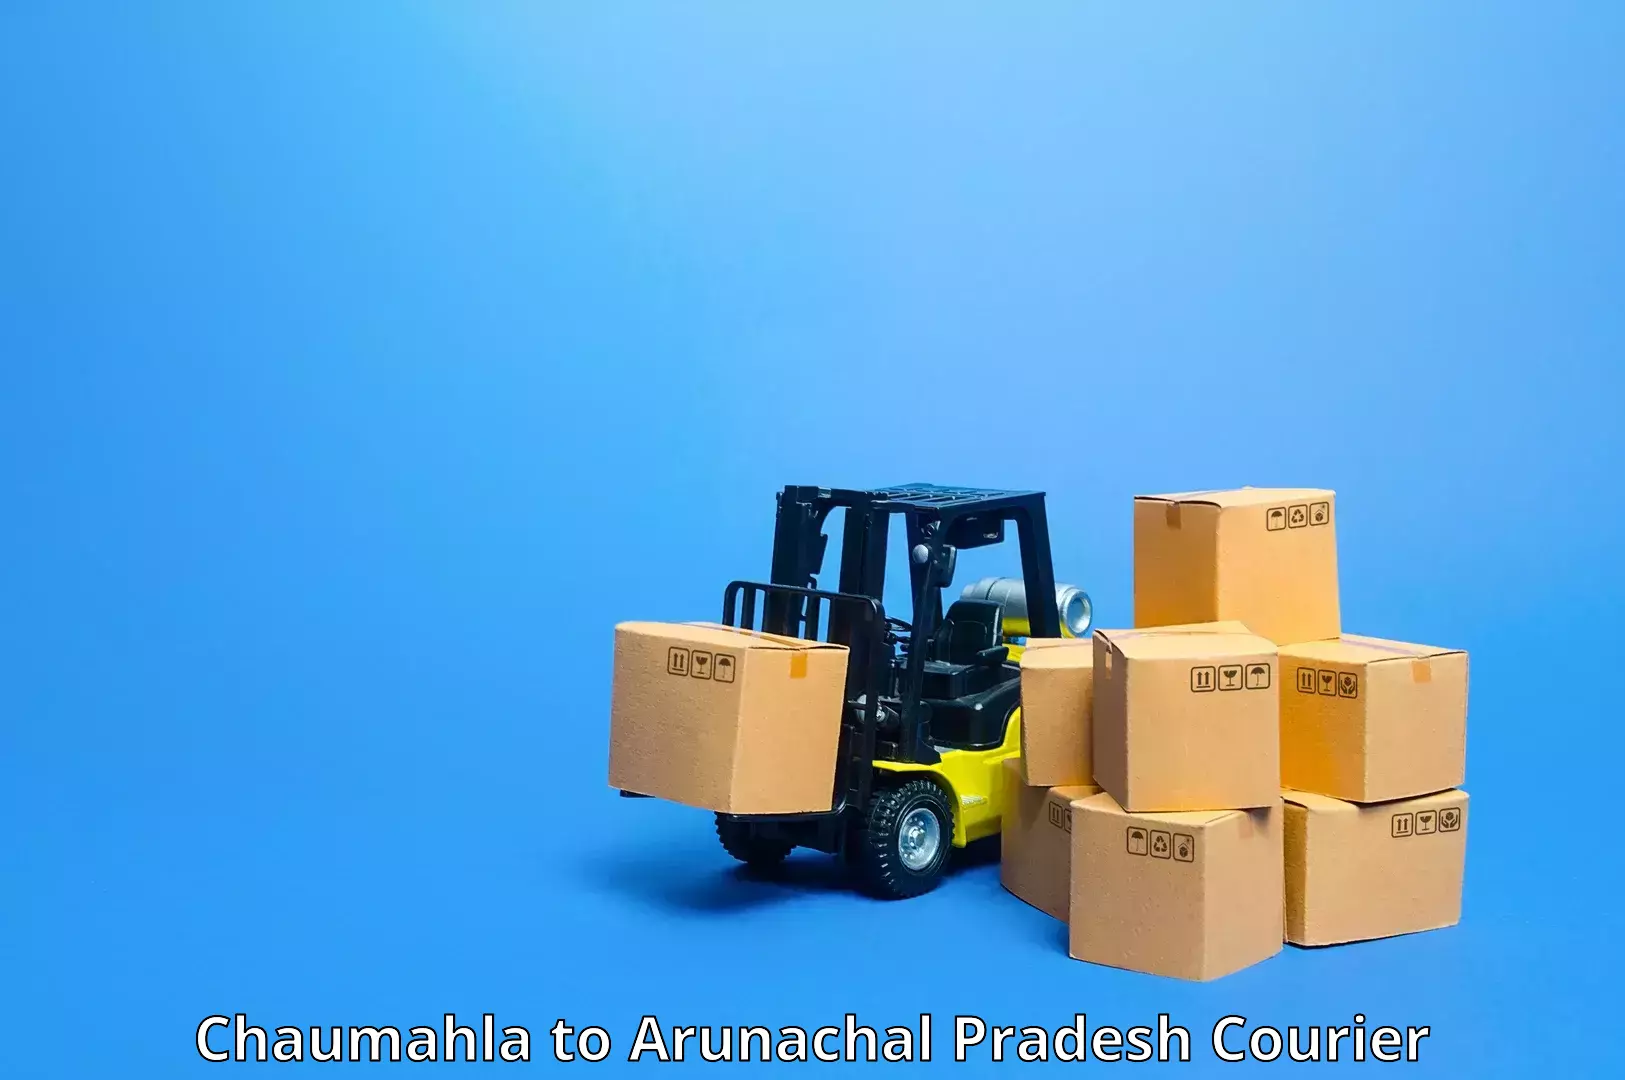 Package delivery network Chaumahla to Aalo